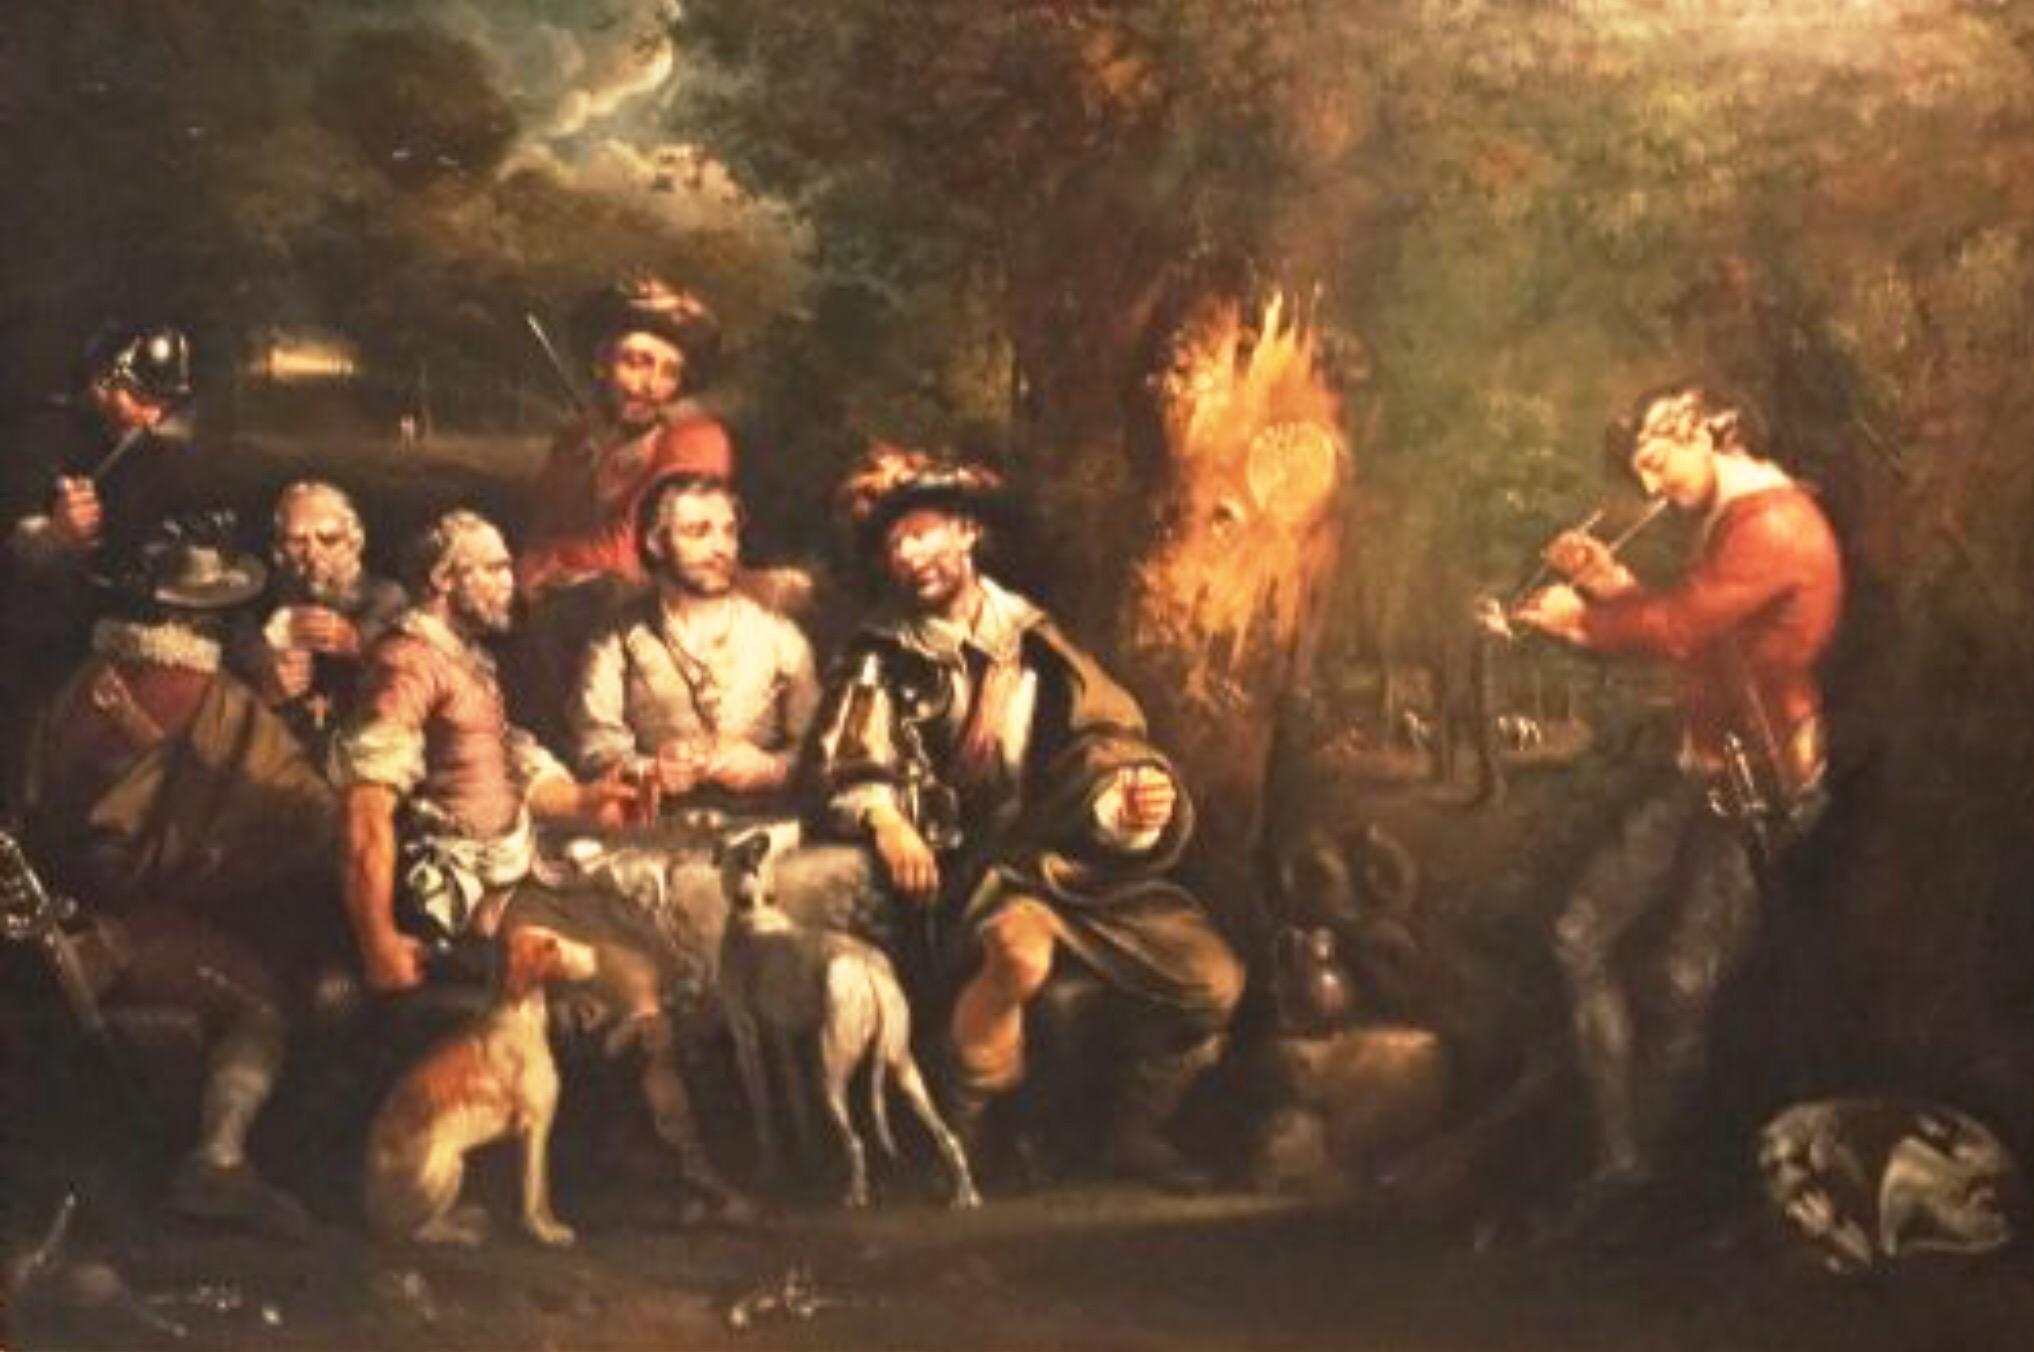 Robert Surtees The Elder Portrait Painting - Huge 18thc Genre Oil Painting Of Bandits In A Forest Mainsforth County Durham